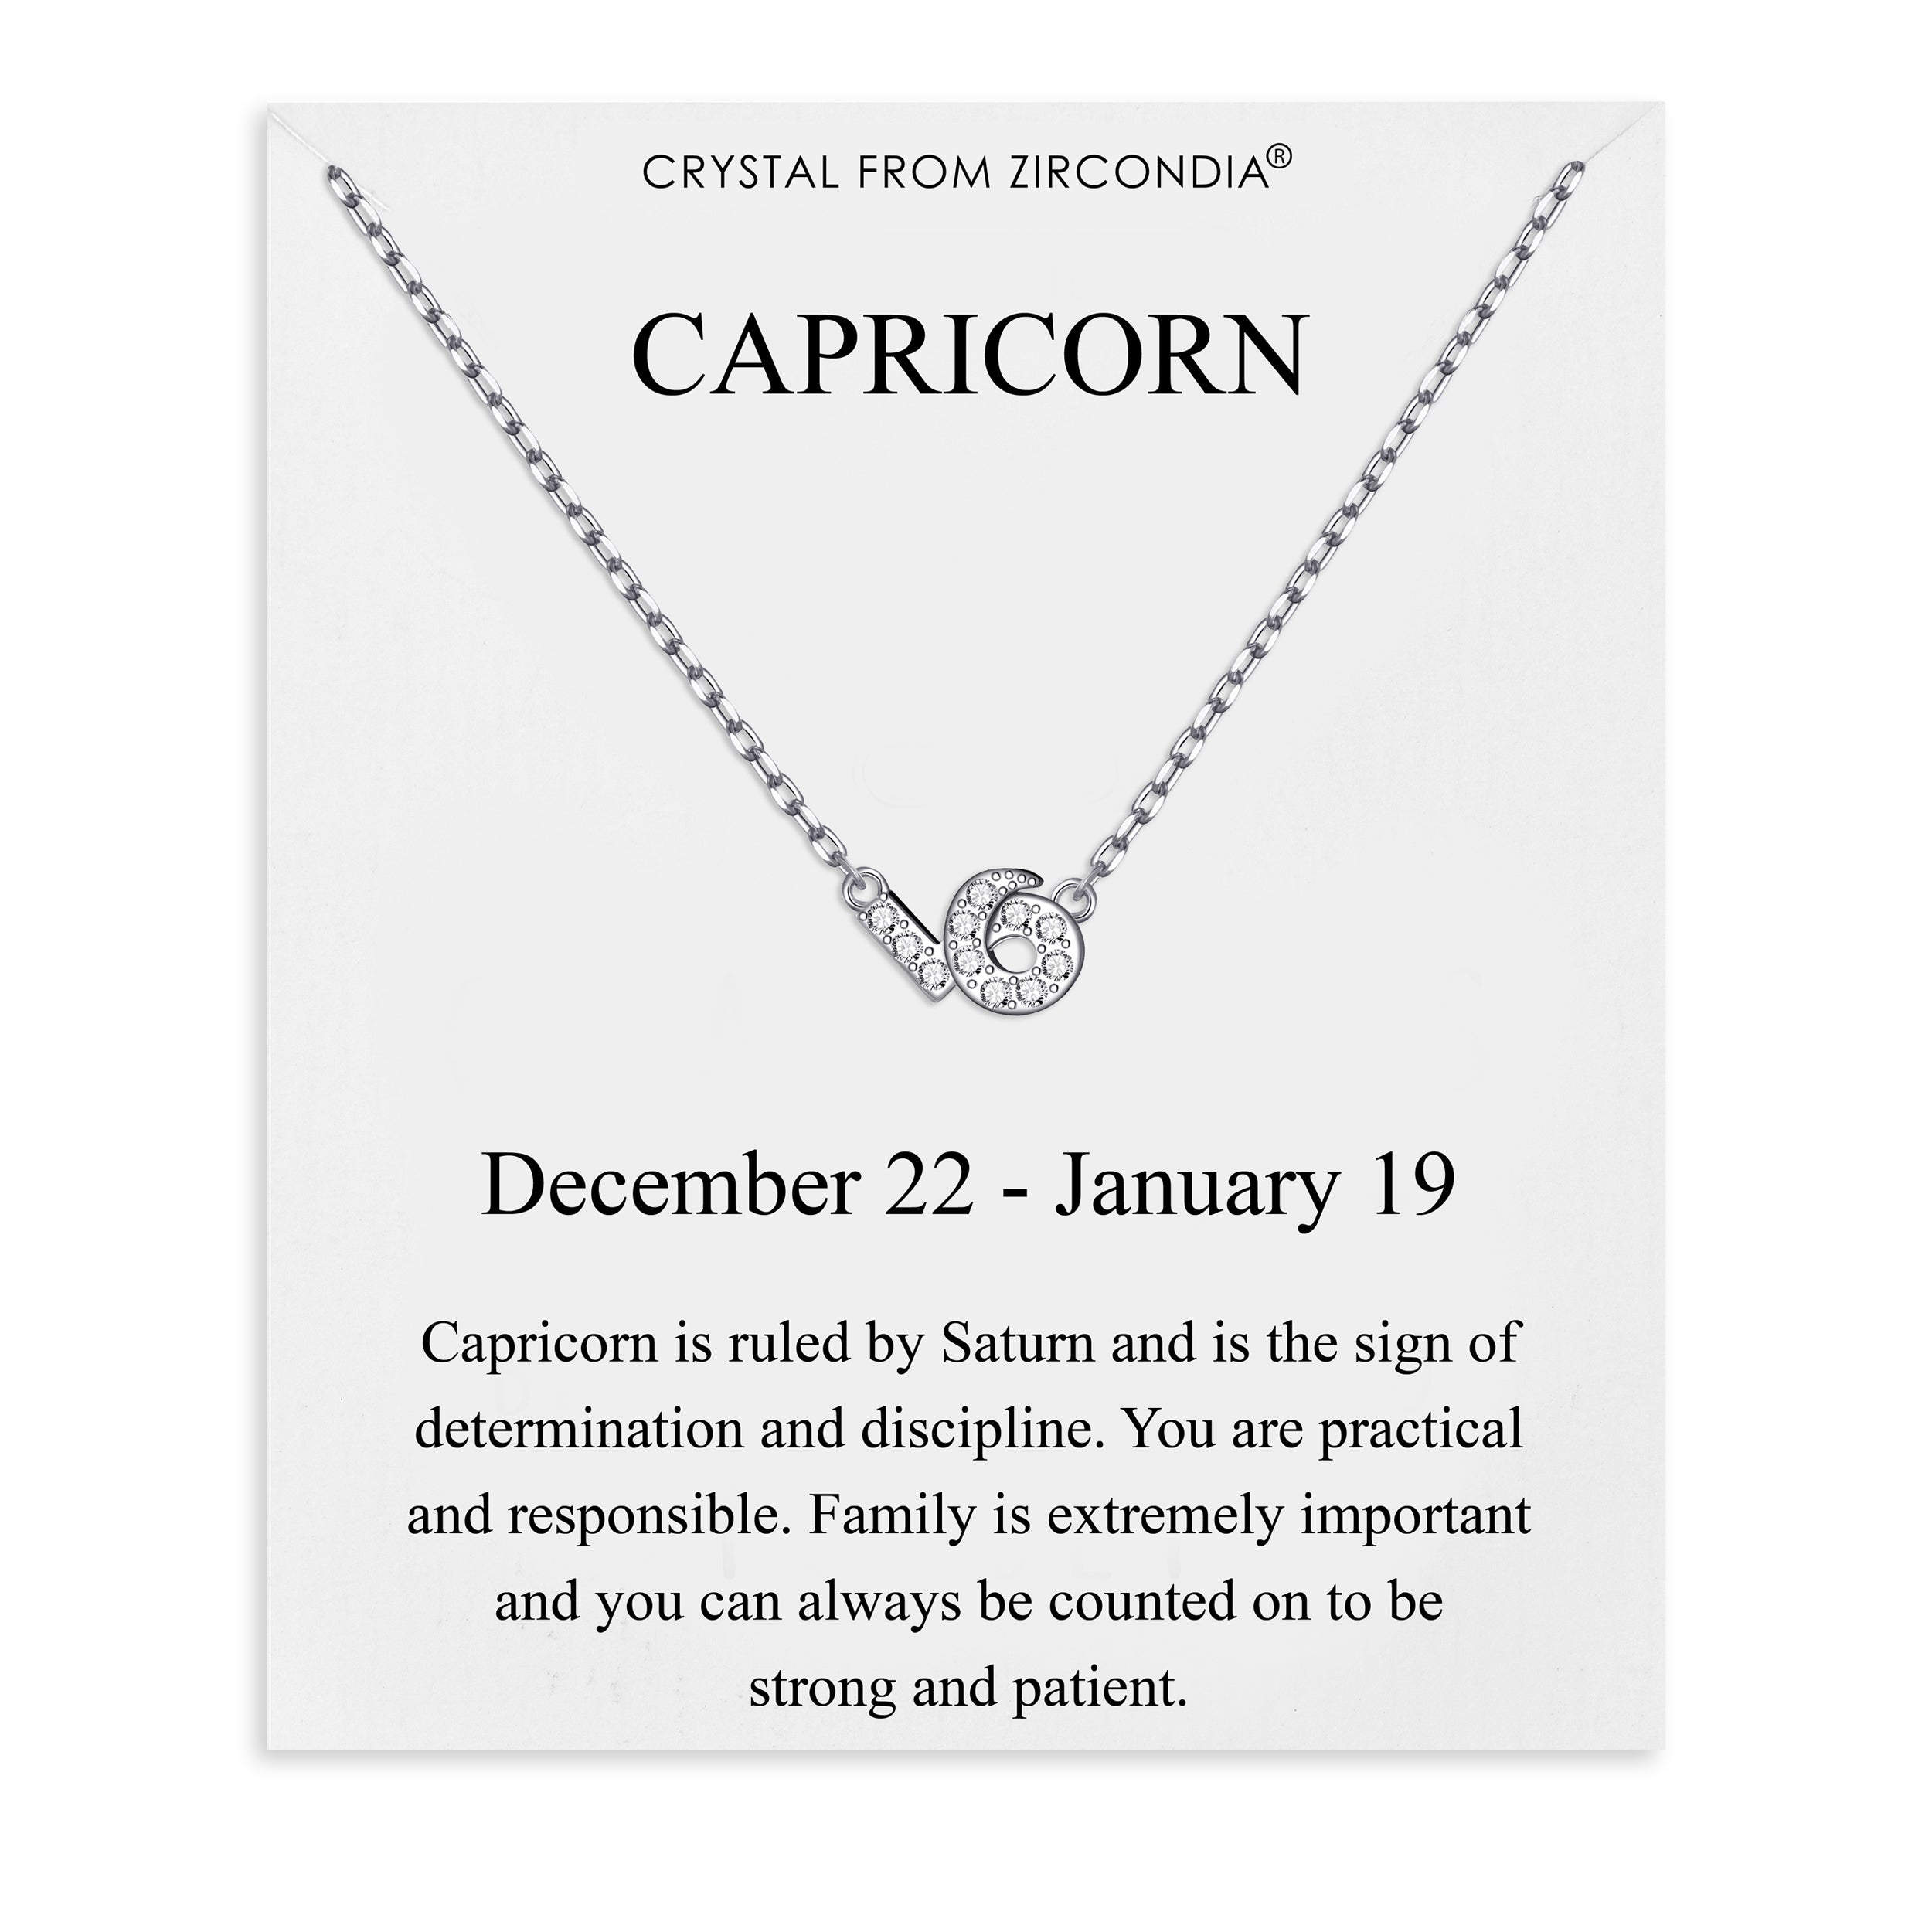 Capricorn Zodiac Star Sign Necklace Created with Zircondia® Crystals